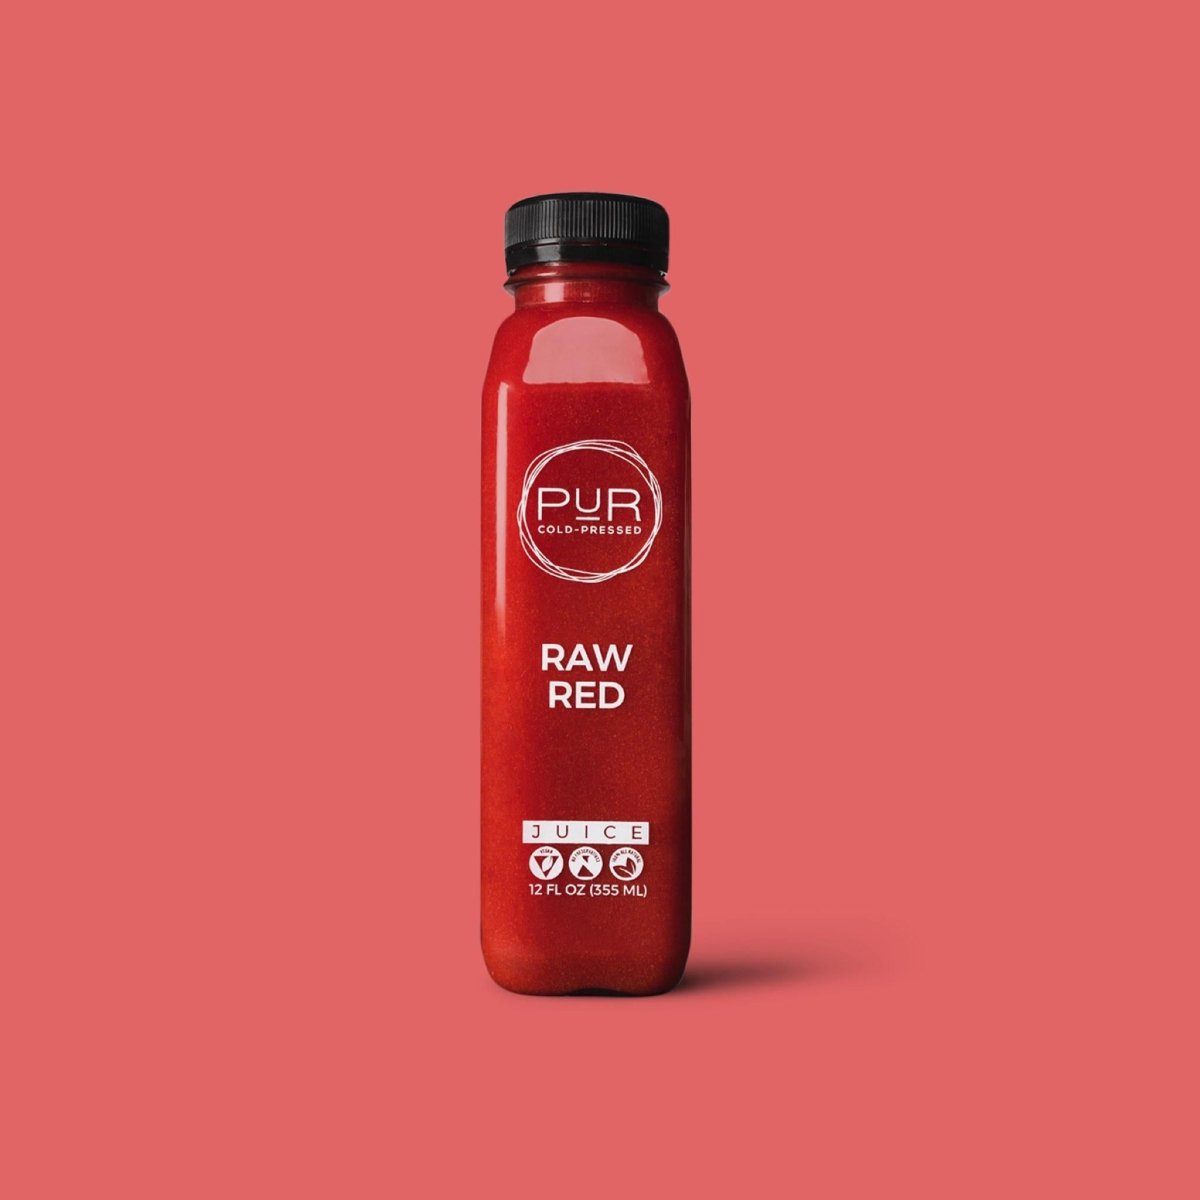 RAW RED - DAILY JUICE KIT - PUR Cold Pressed Juice - CUR - CURs - Daily Juice Packs - Juice Kit